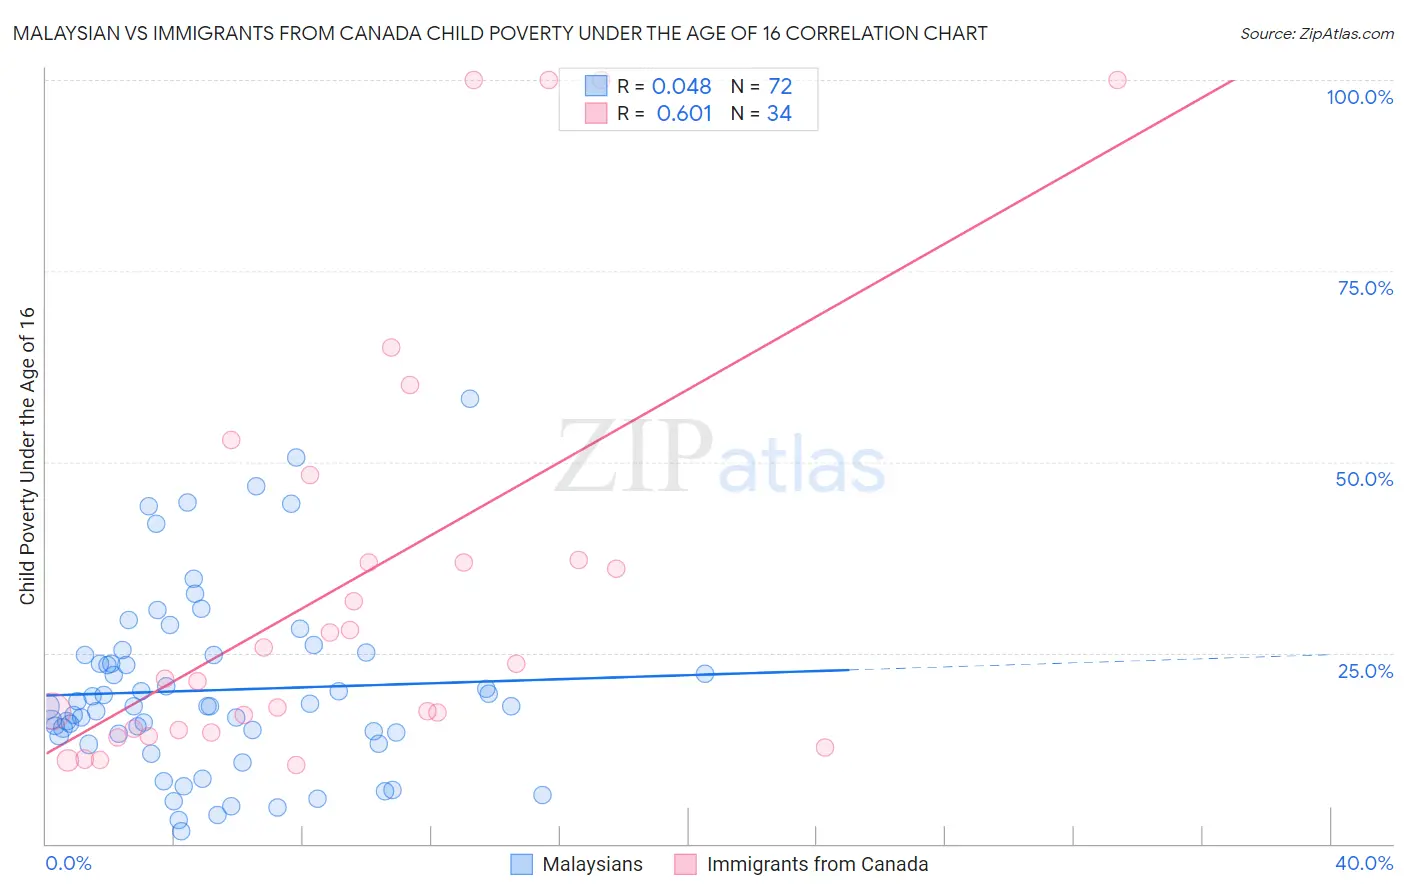 Malaysian vs Immigrants from Canada Child Poverty Under the Age of 16